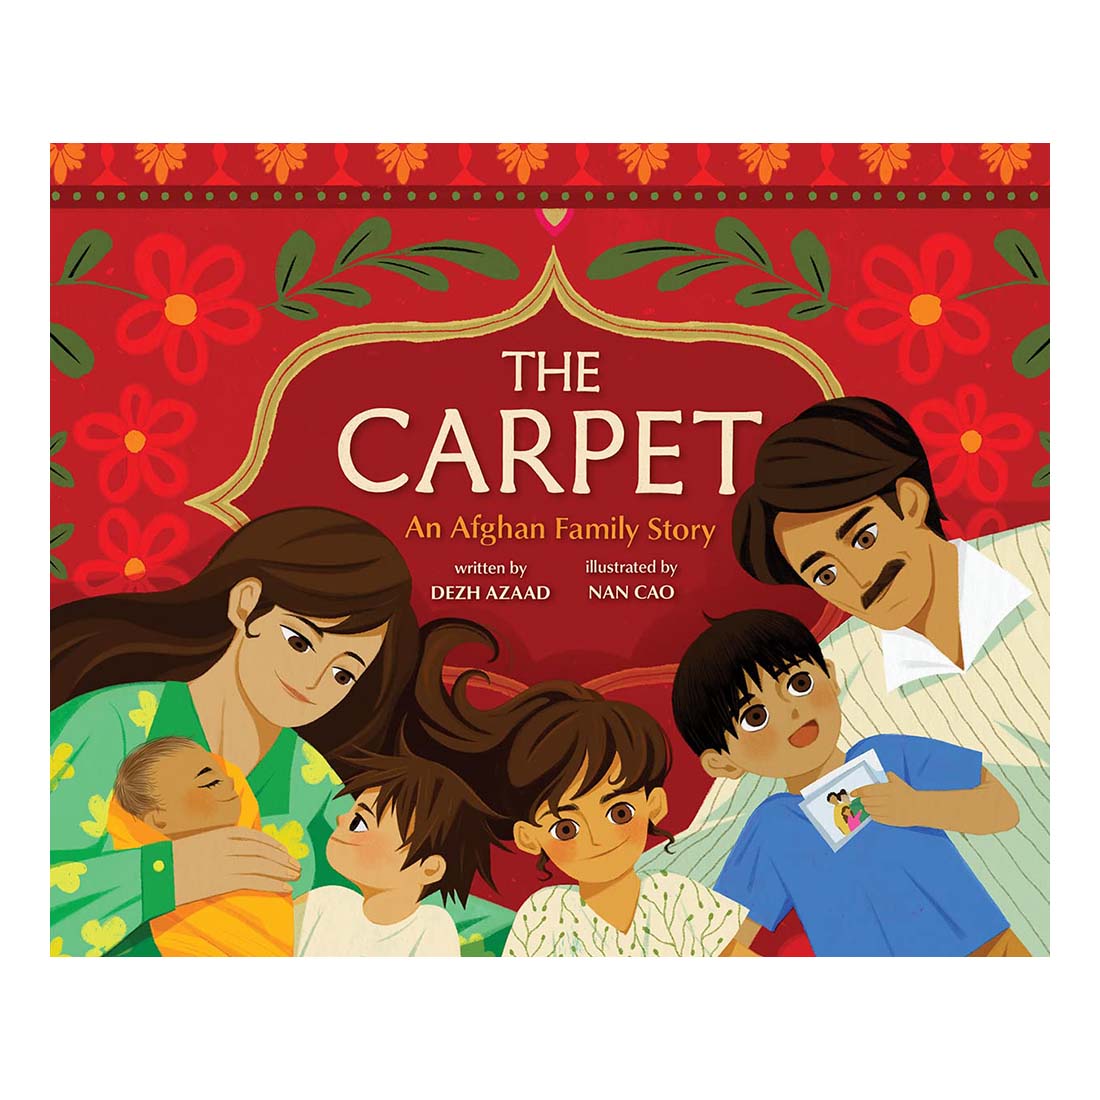 The Carpet: An Afghan Family Story